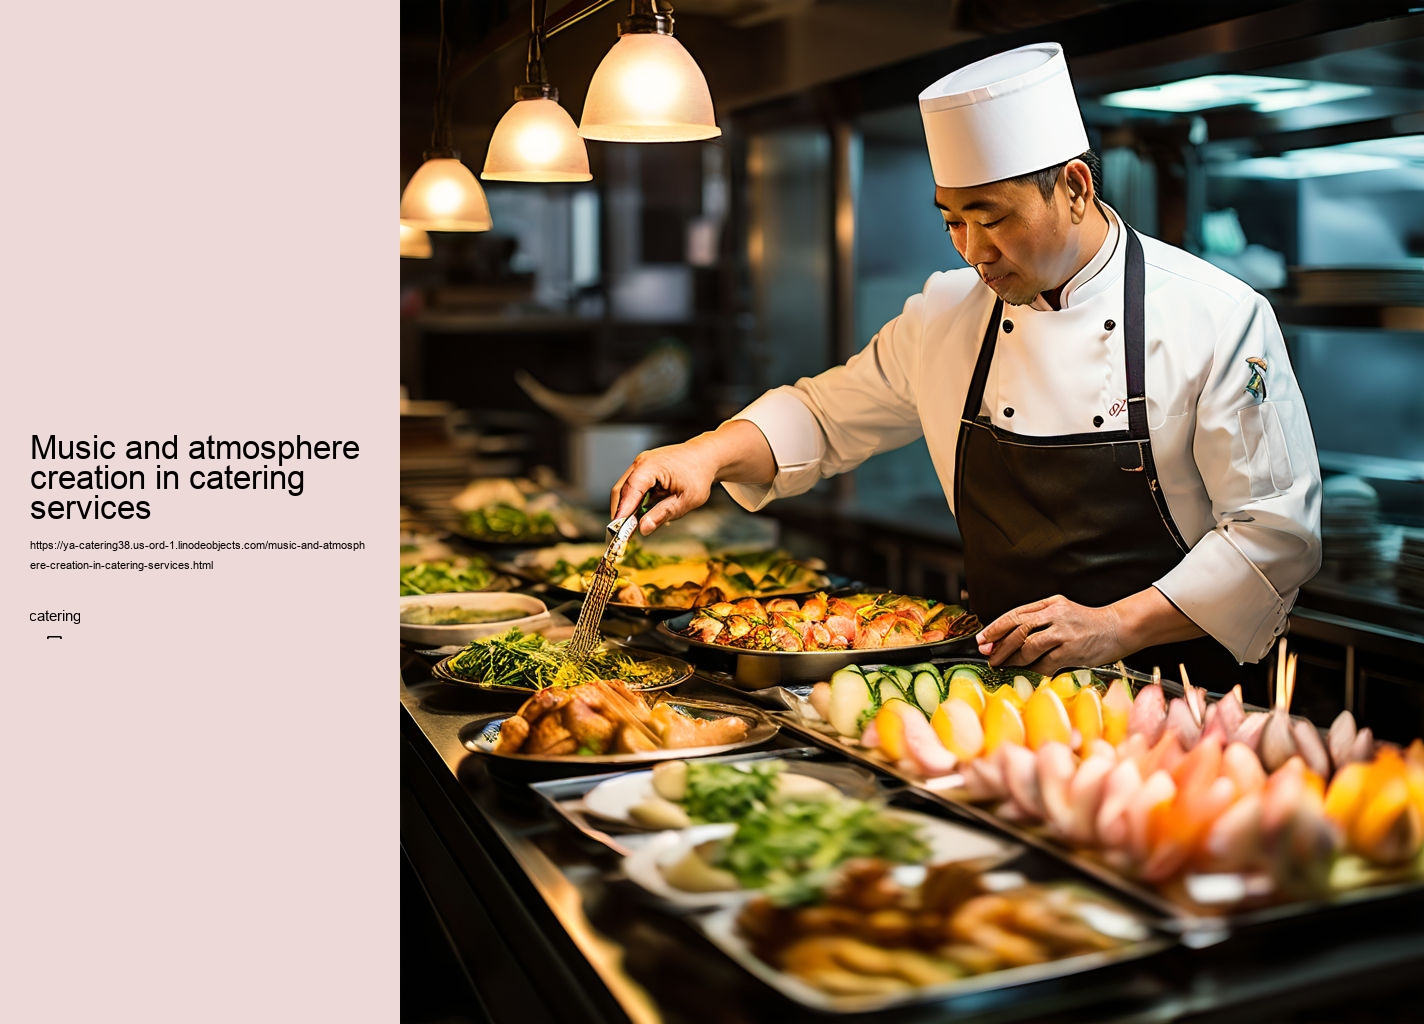 Music and atmosphere creation in catering services